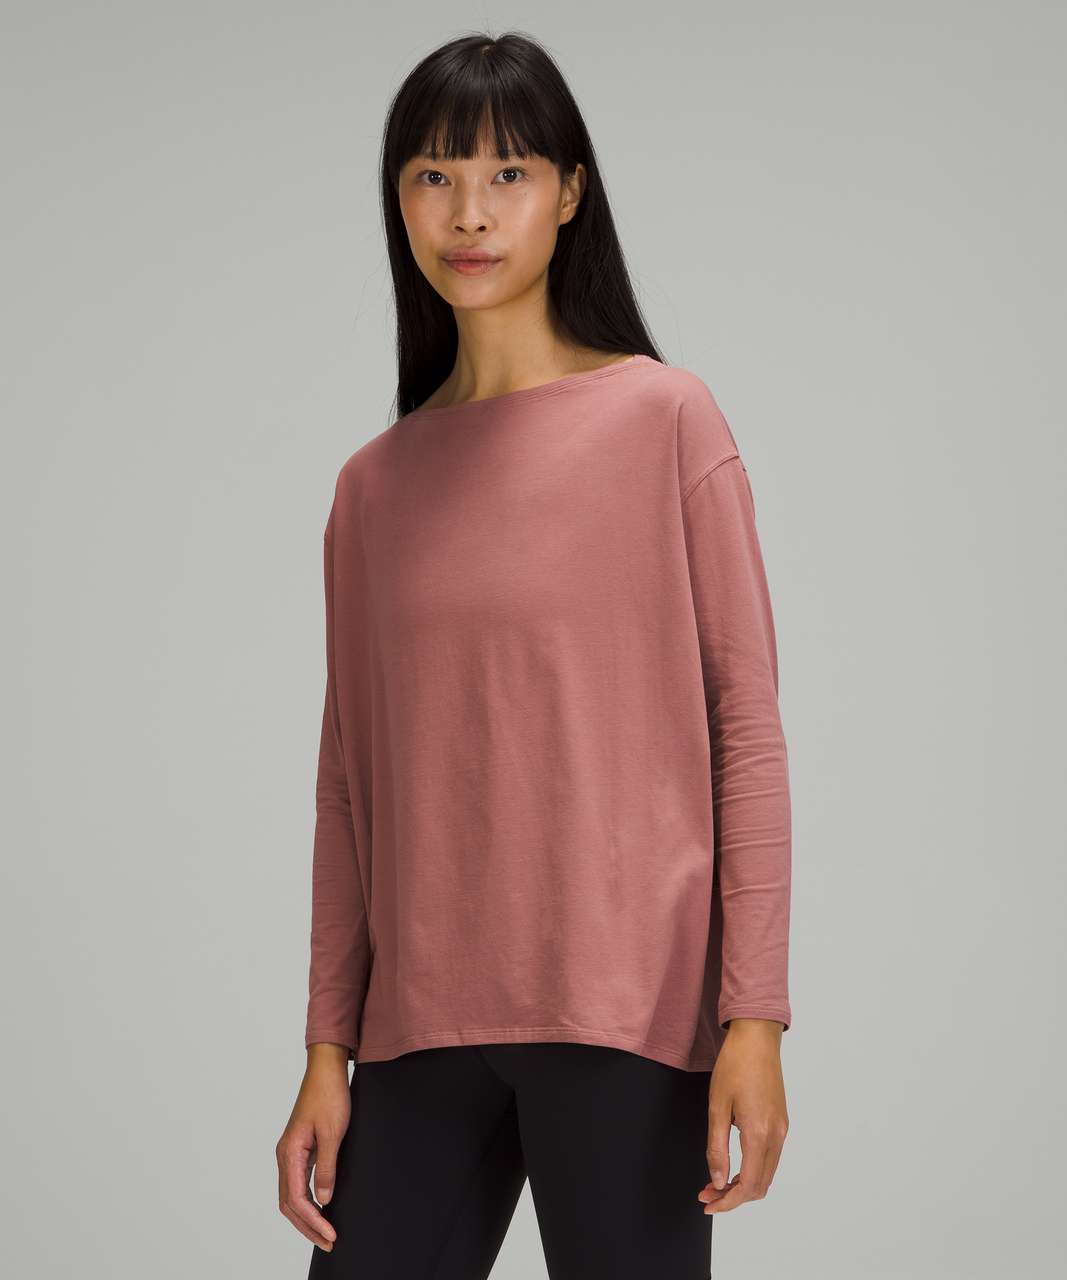 Lululemon Back In Action Long Sleeve - Spiced Chai